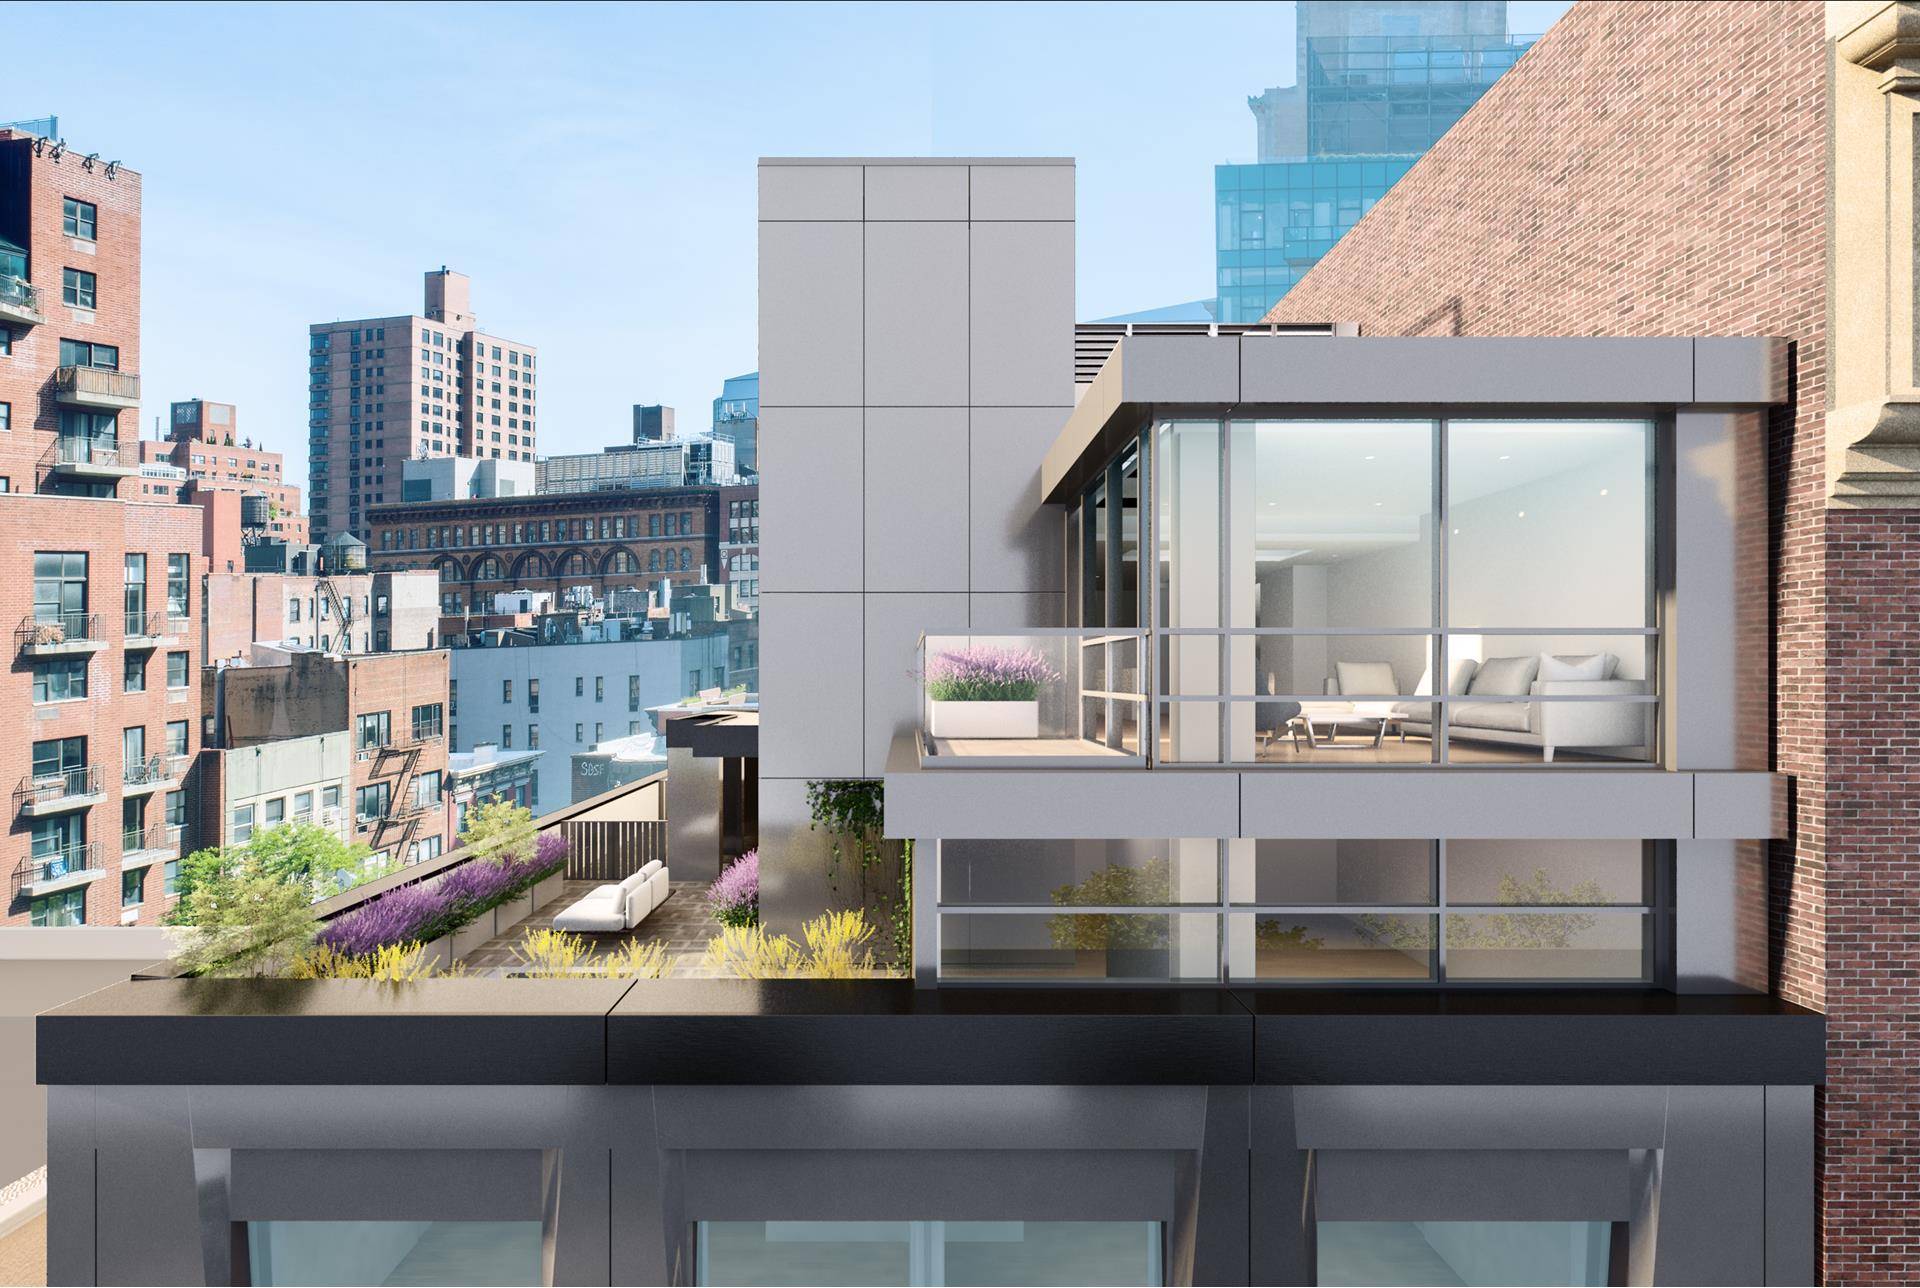 SHOW HOURS FOR PENTHOUSE ARE 9AM 2 30PM 128 East 28Th Is A New Development Built From Ground Up, With Ten, 2 Bedrooms, 2 Bathrooms And Featuring 1 Penthouse.